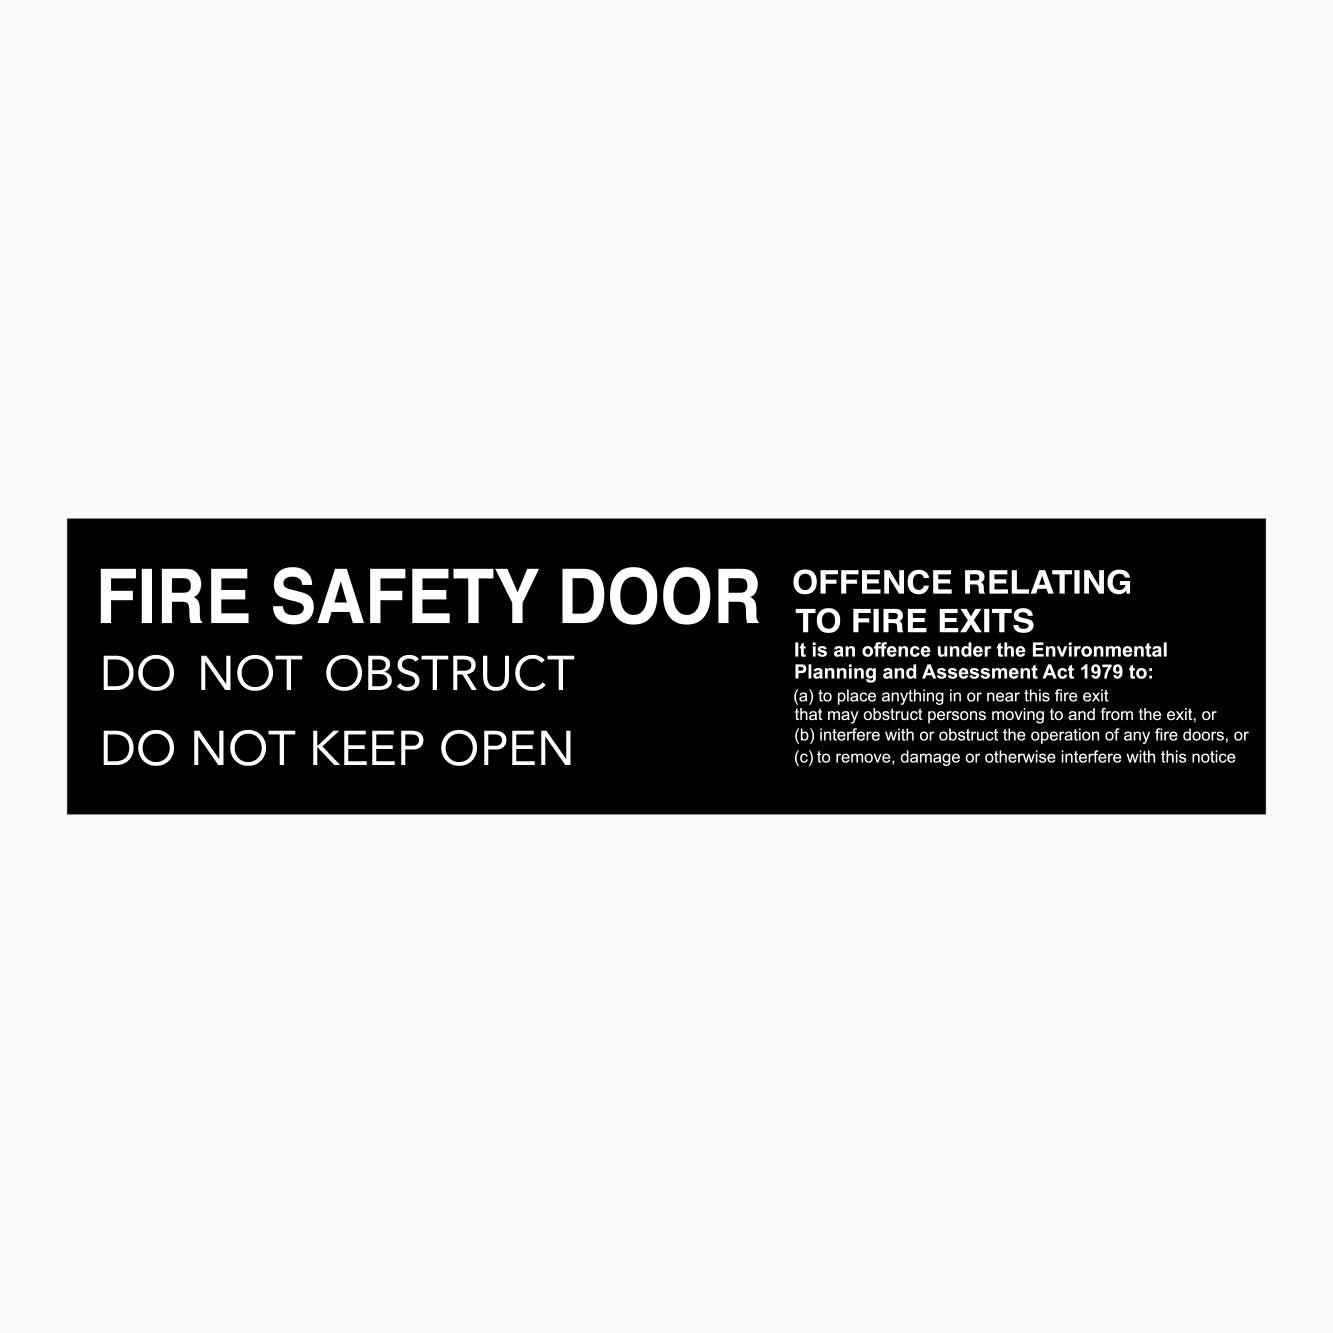 FIRE SAFETY DOOR SIGN AND OFFENCE RELATING TO FIRE EXITS SIGN